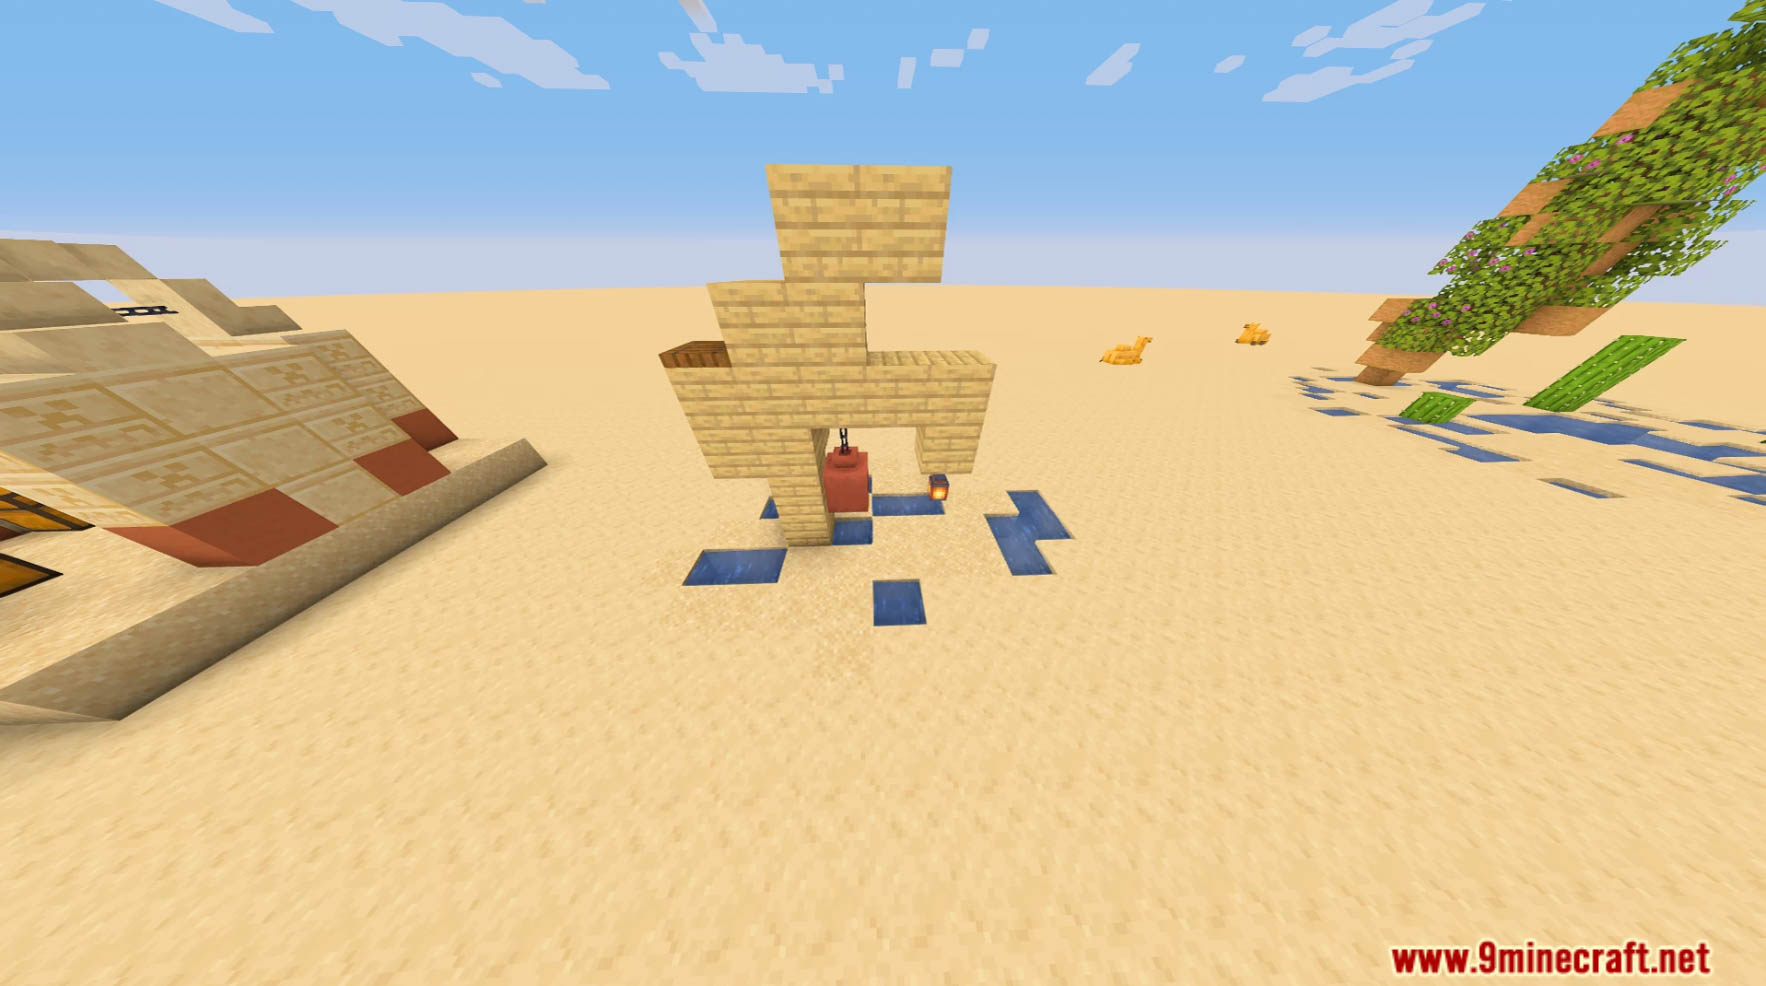 Desert Structures Data Pack (1.20.6, 1.20.1) - Breathe Life Into The Dunes 10